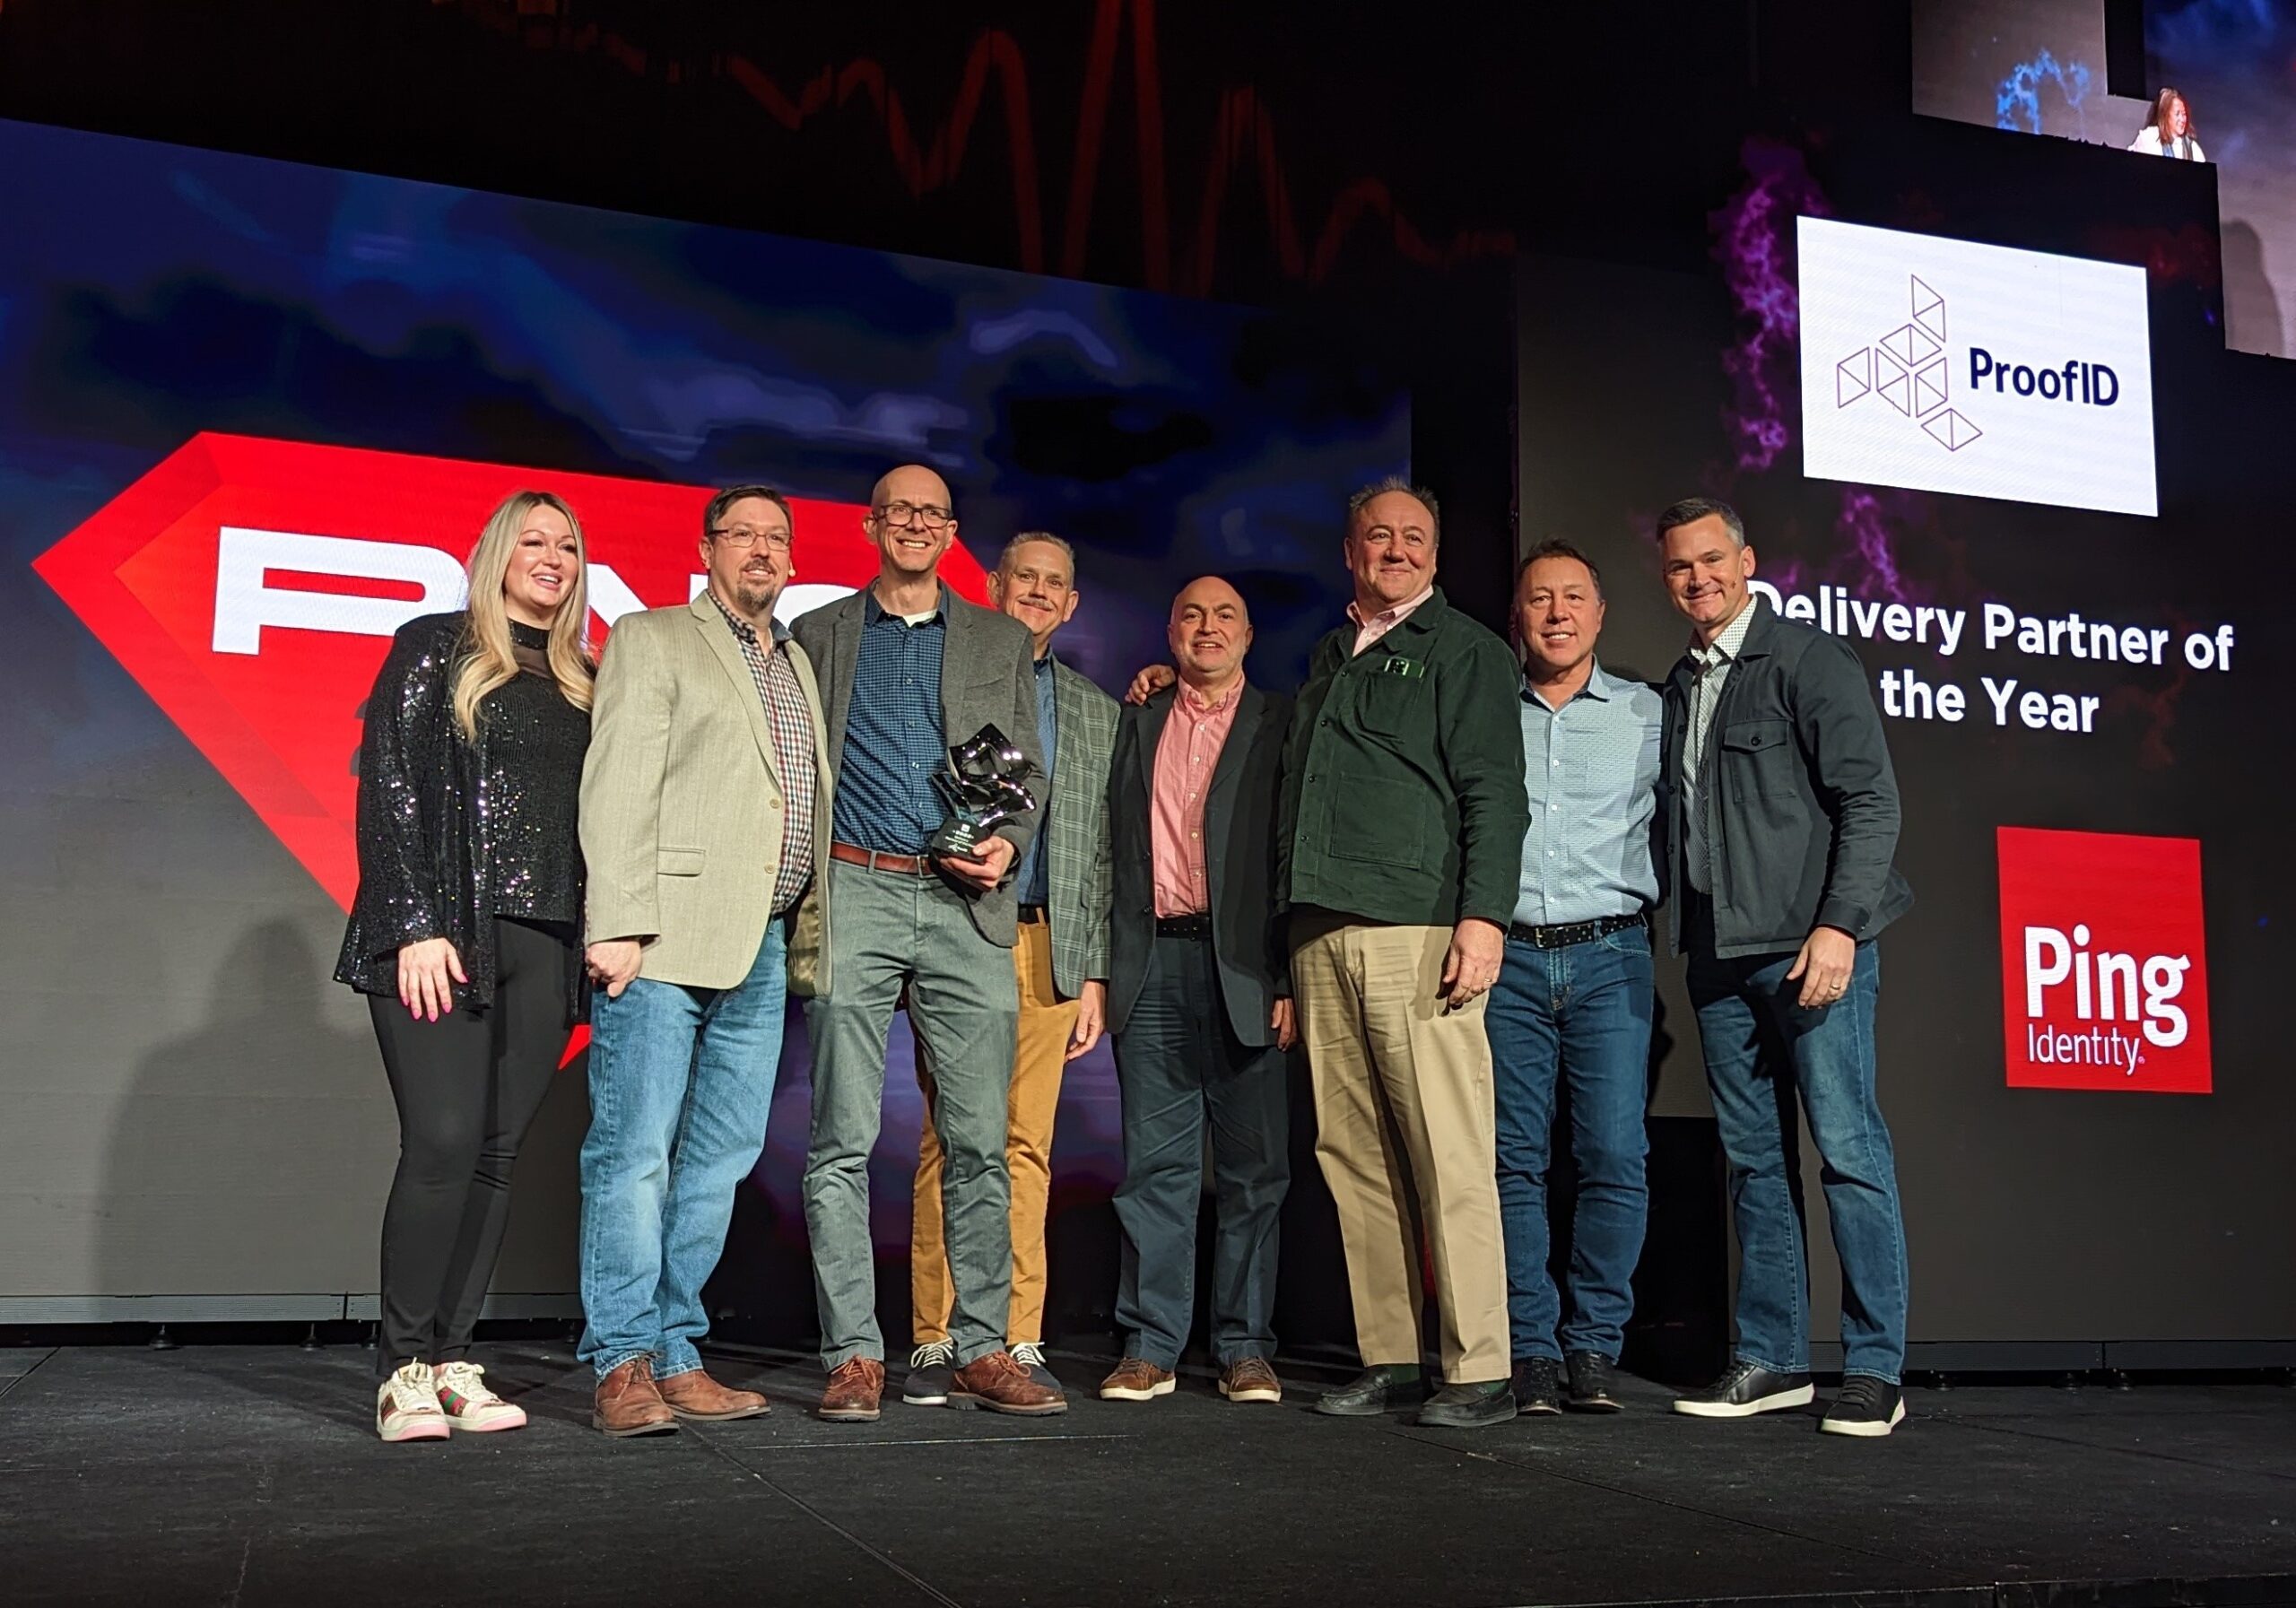 ProofID awarded 5th consecutive global delivery award at Ping Identity's SKO. (L-R) Staci Rodriguez (Ping, Snr Director NA Channel Sales), Alex Ryals (Ping, VP Channel Sales), Tom Eggleston (ProofID, CEO), Scott Montgomery (ProofID, VP US Sales), John Iandolo (ProofID, CRO), Gareth Noonan (ProofID, CSO), Andre Durand (Ping, CEO), Jason Wolf (Ping CRO)